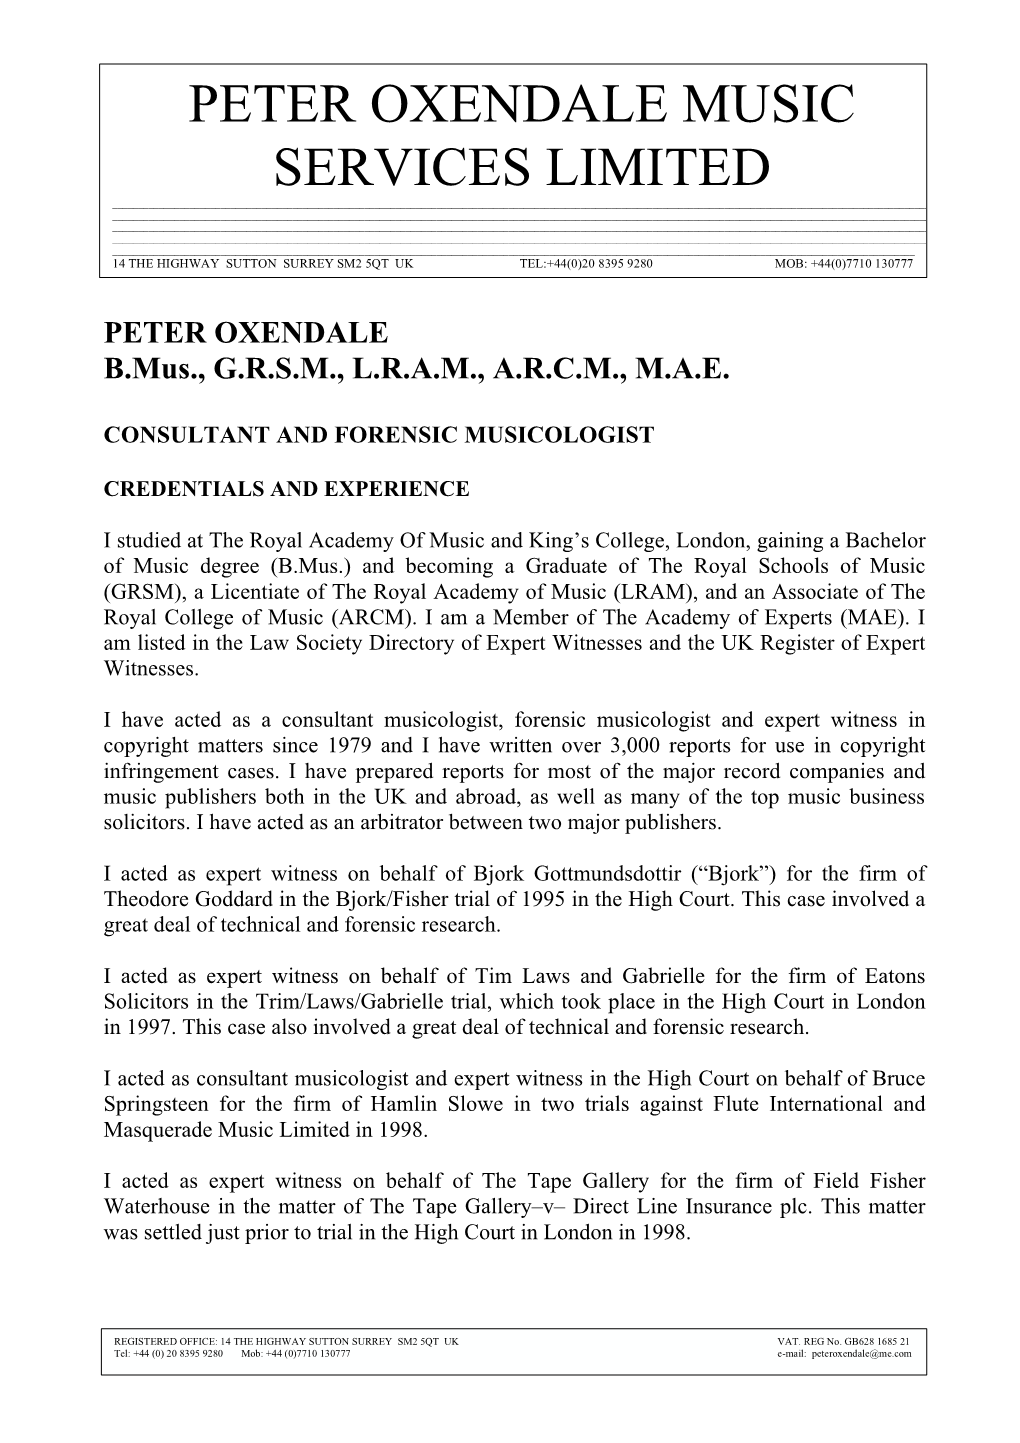 Peter Oxendale Music Services Limited